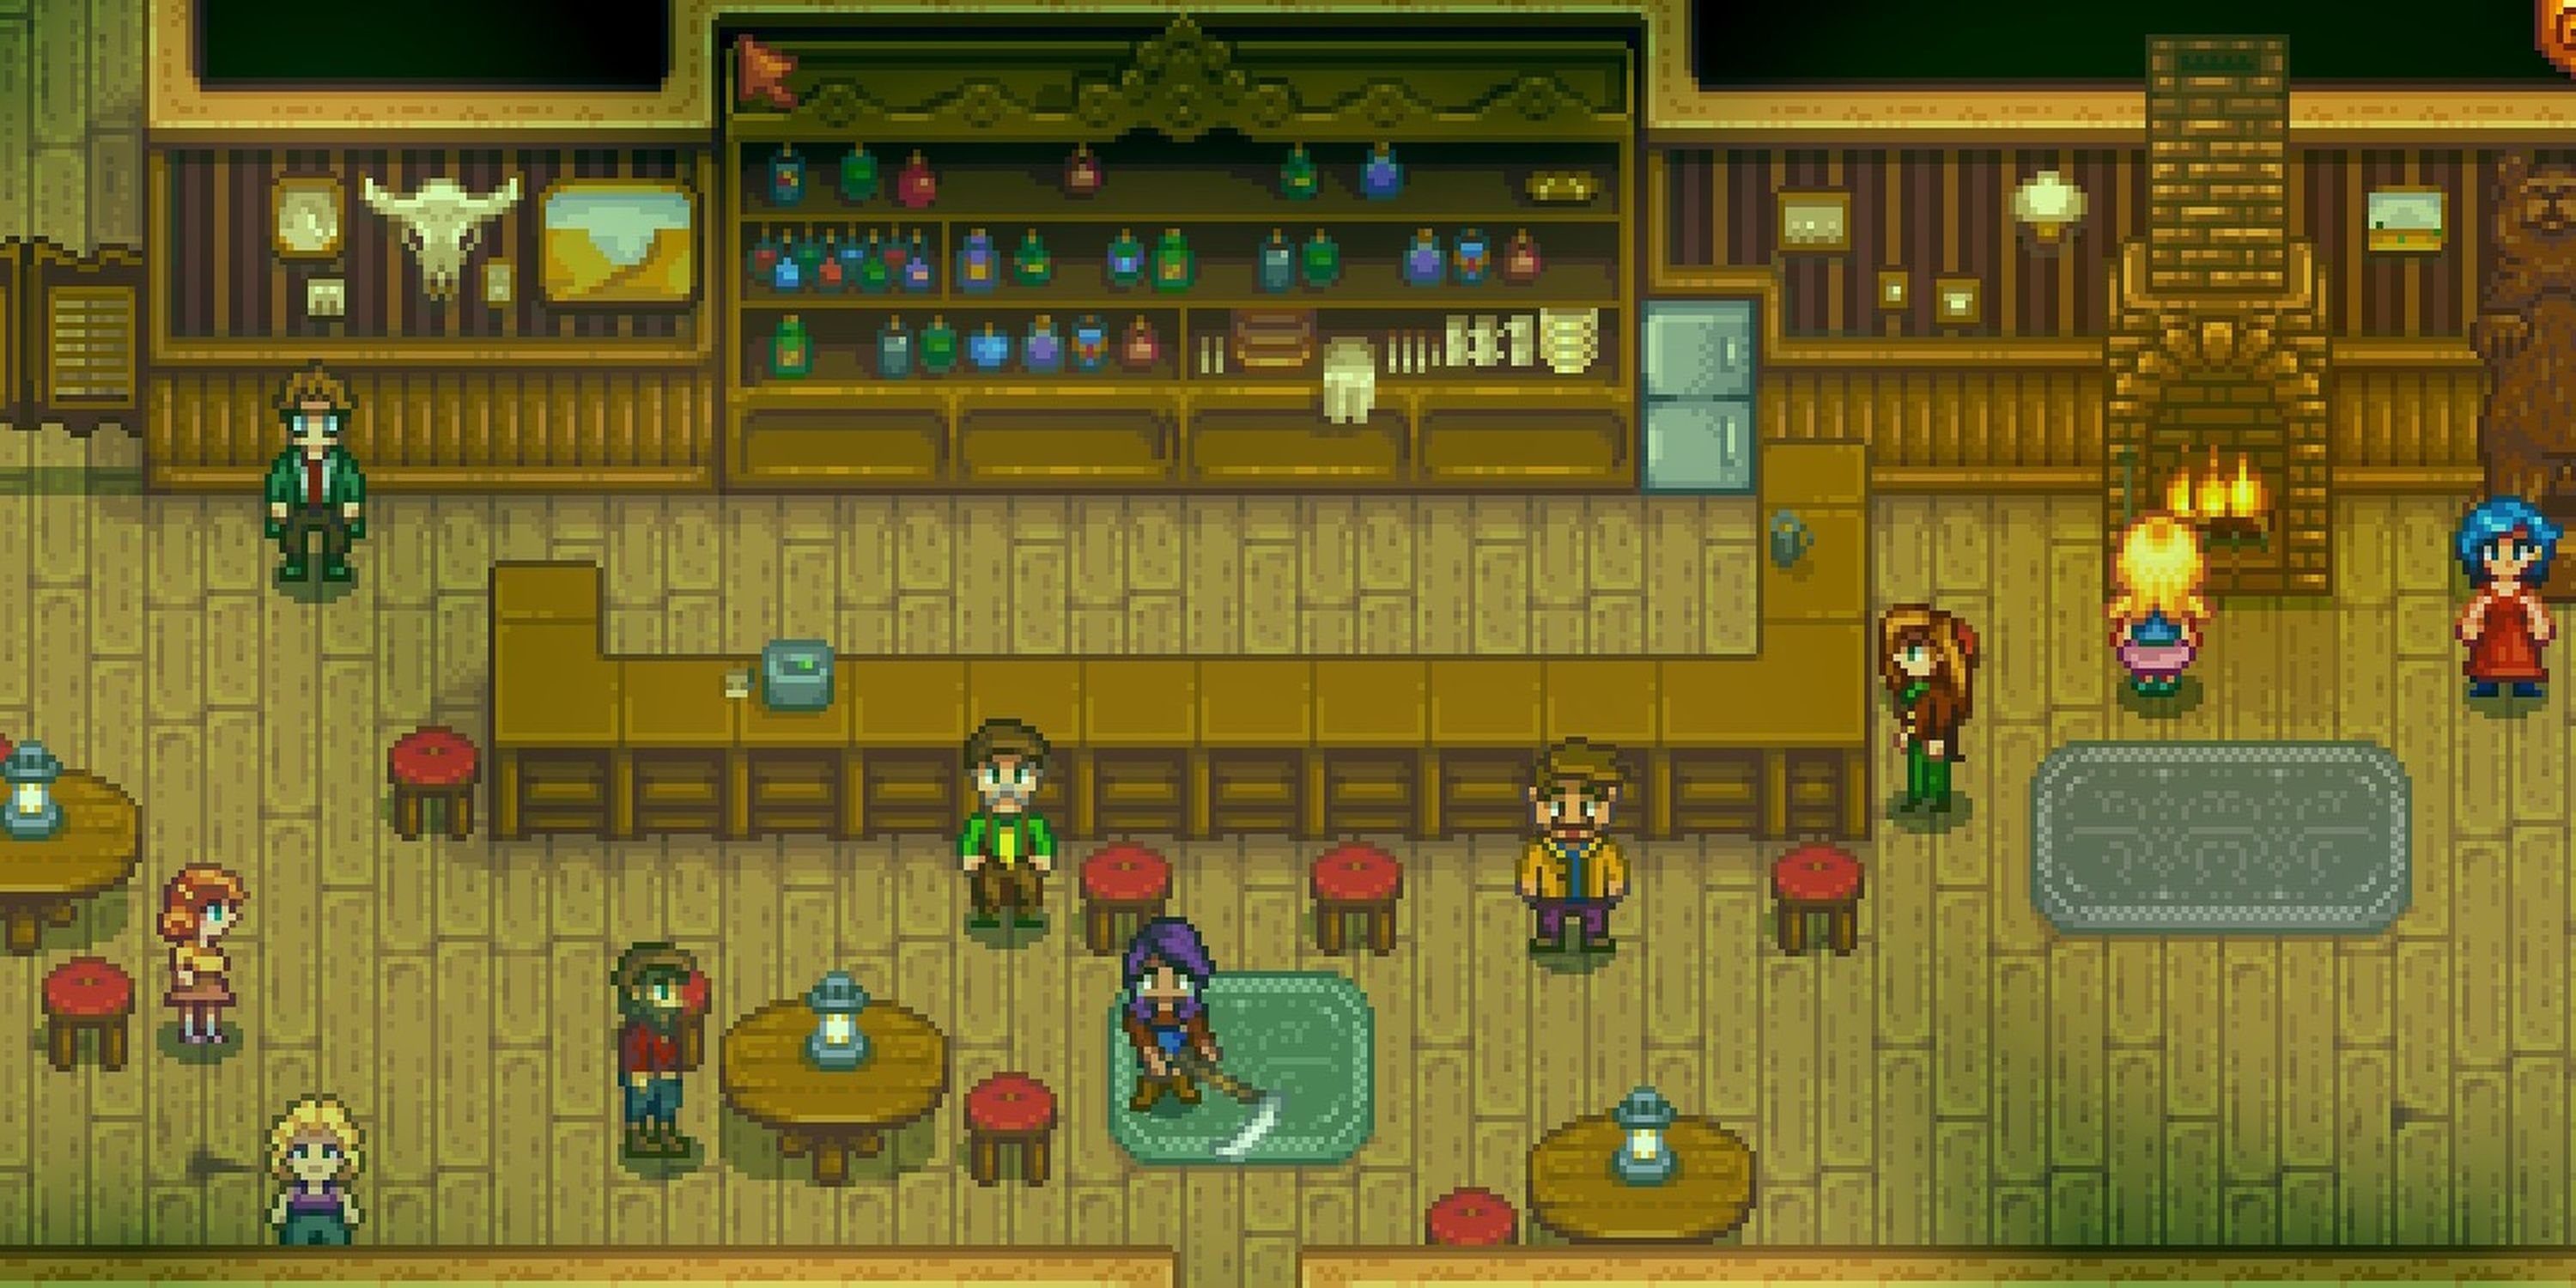 Stardew Valley Green Rain Event, with Farmer in Saloon during the event. 